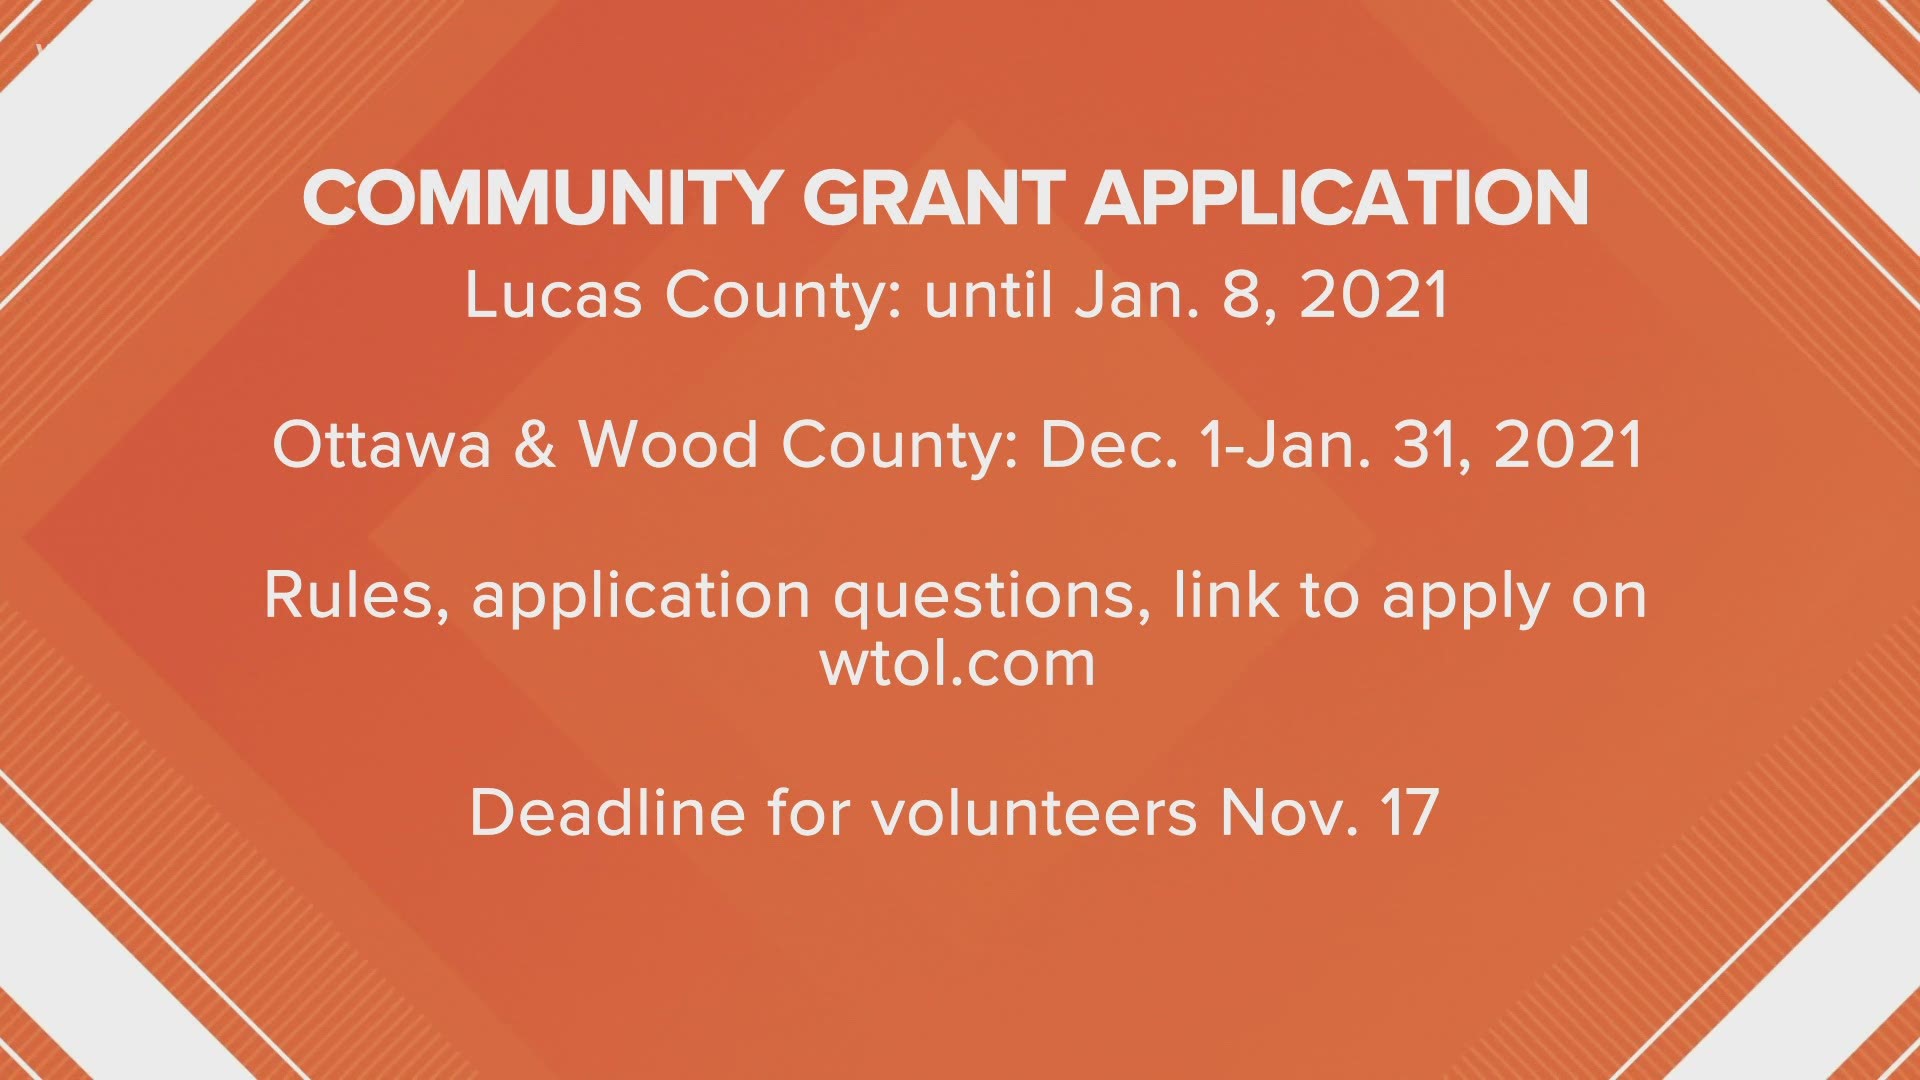 Community-based entities have until Jan. 8 to apply for monetary funding over a three-year period.